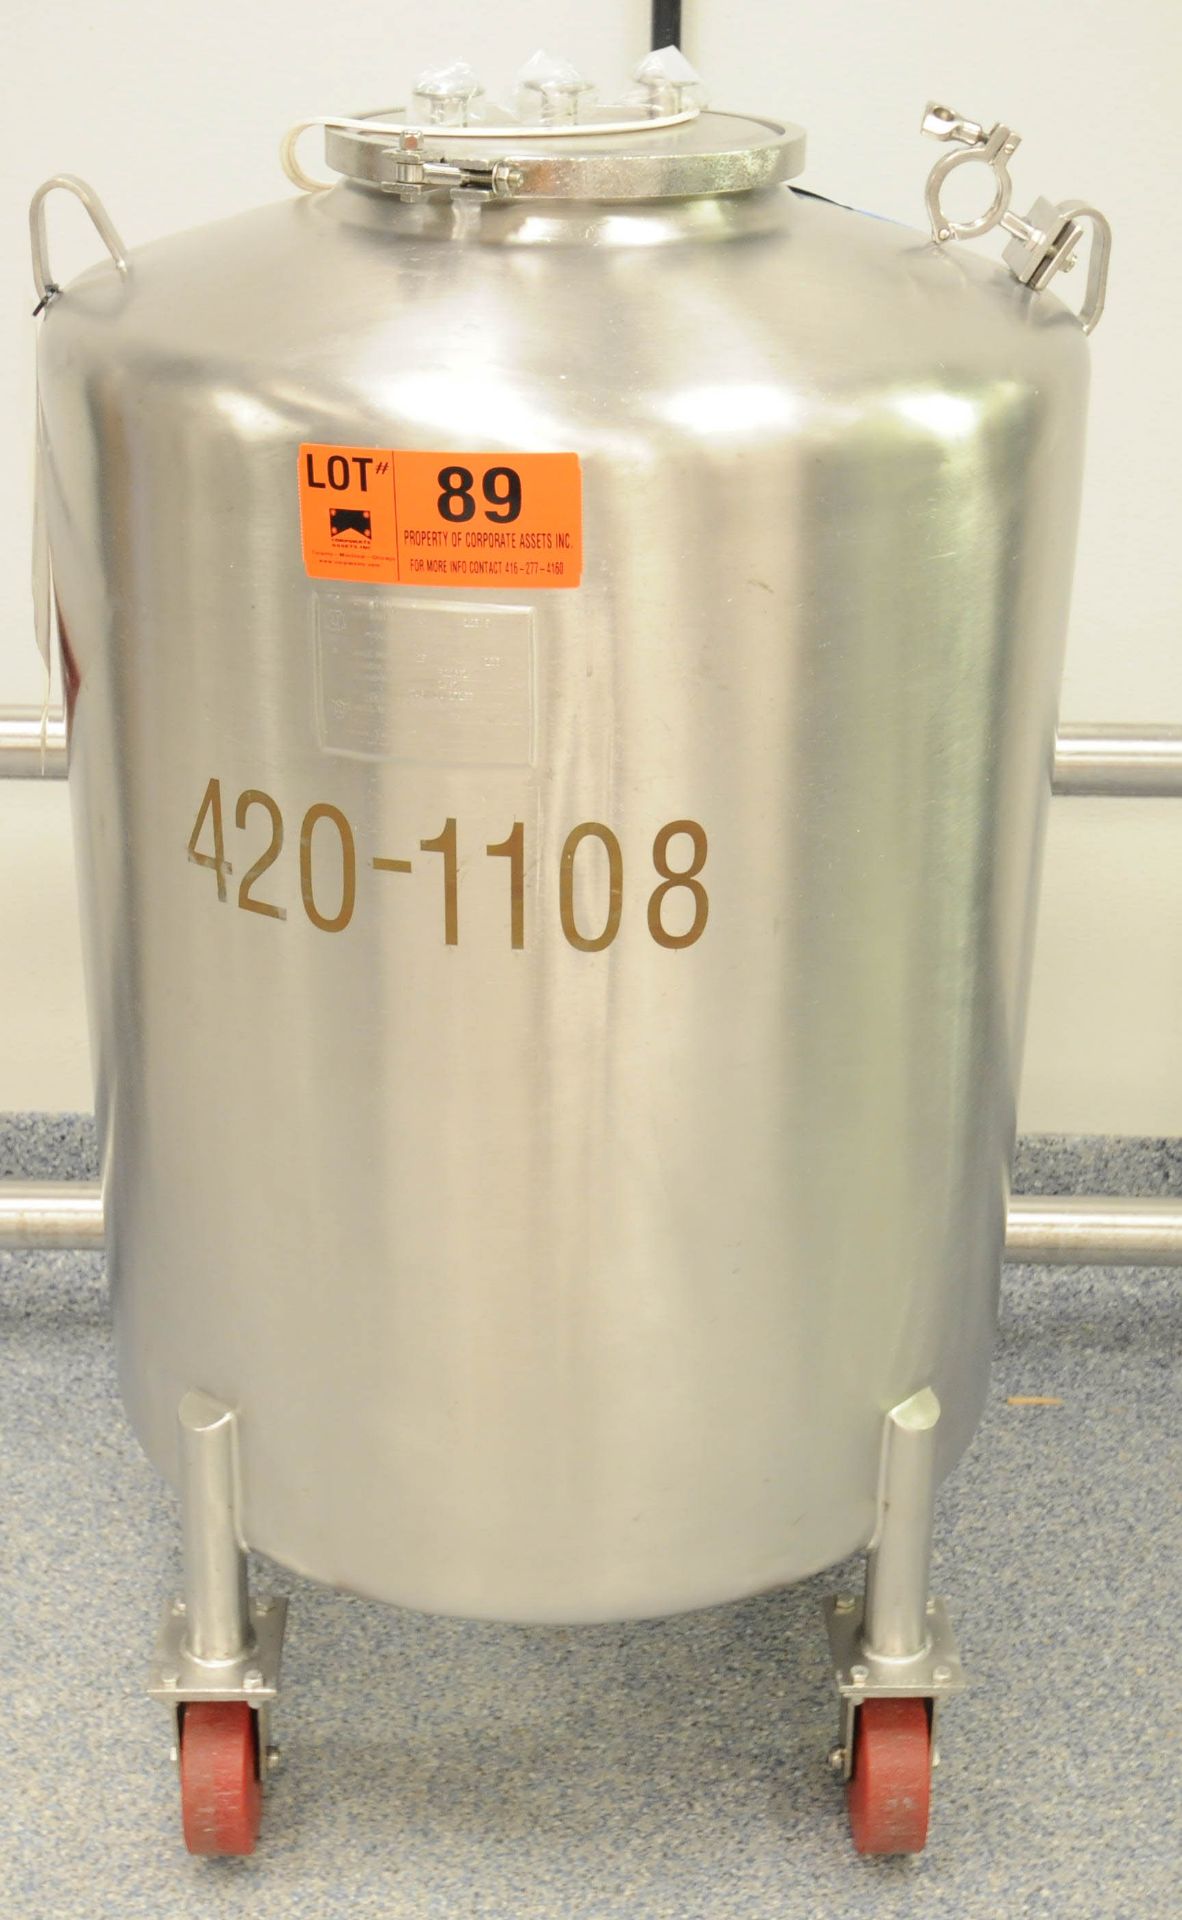 MUELLER PORTABLE STAINLESS STEEL TANK WITH 25 PSIG MAWP @ 133 DEG F, 13" TOP LID, 1" BOTTOM